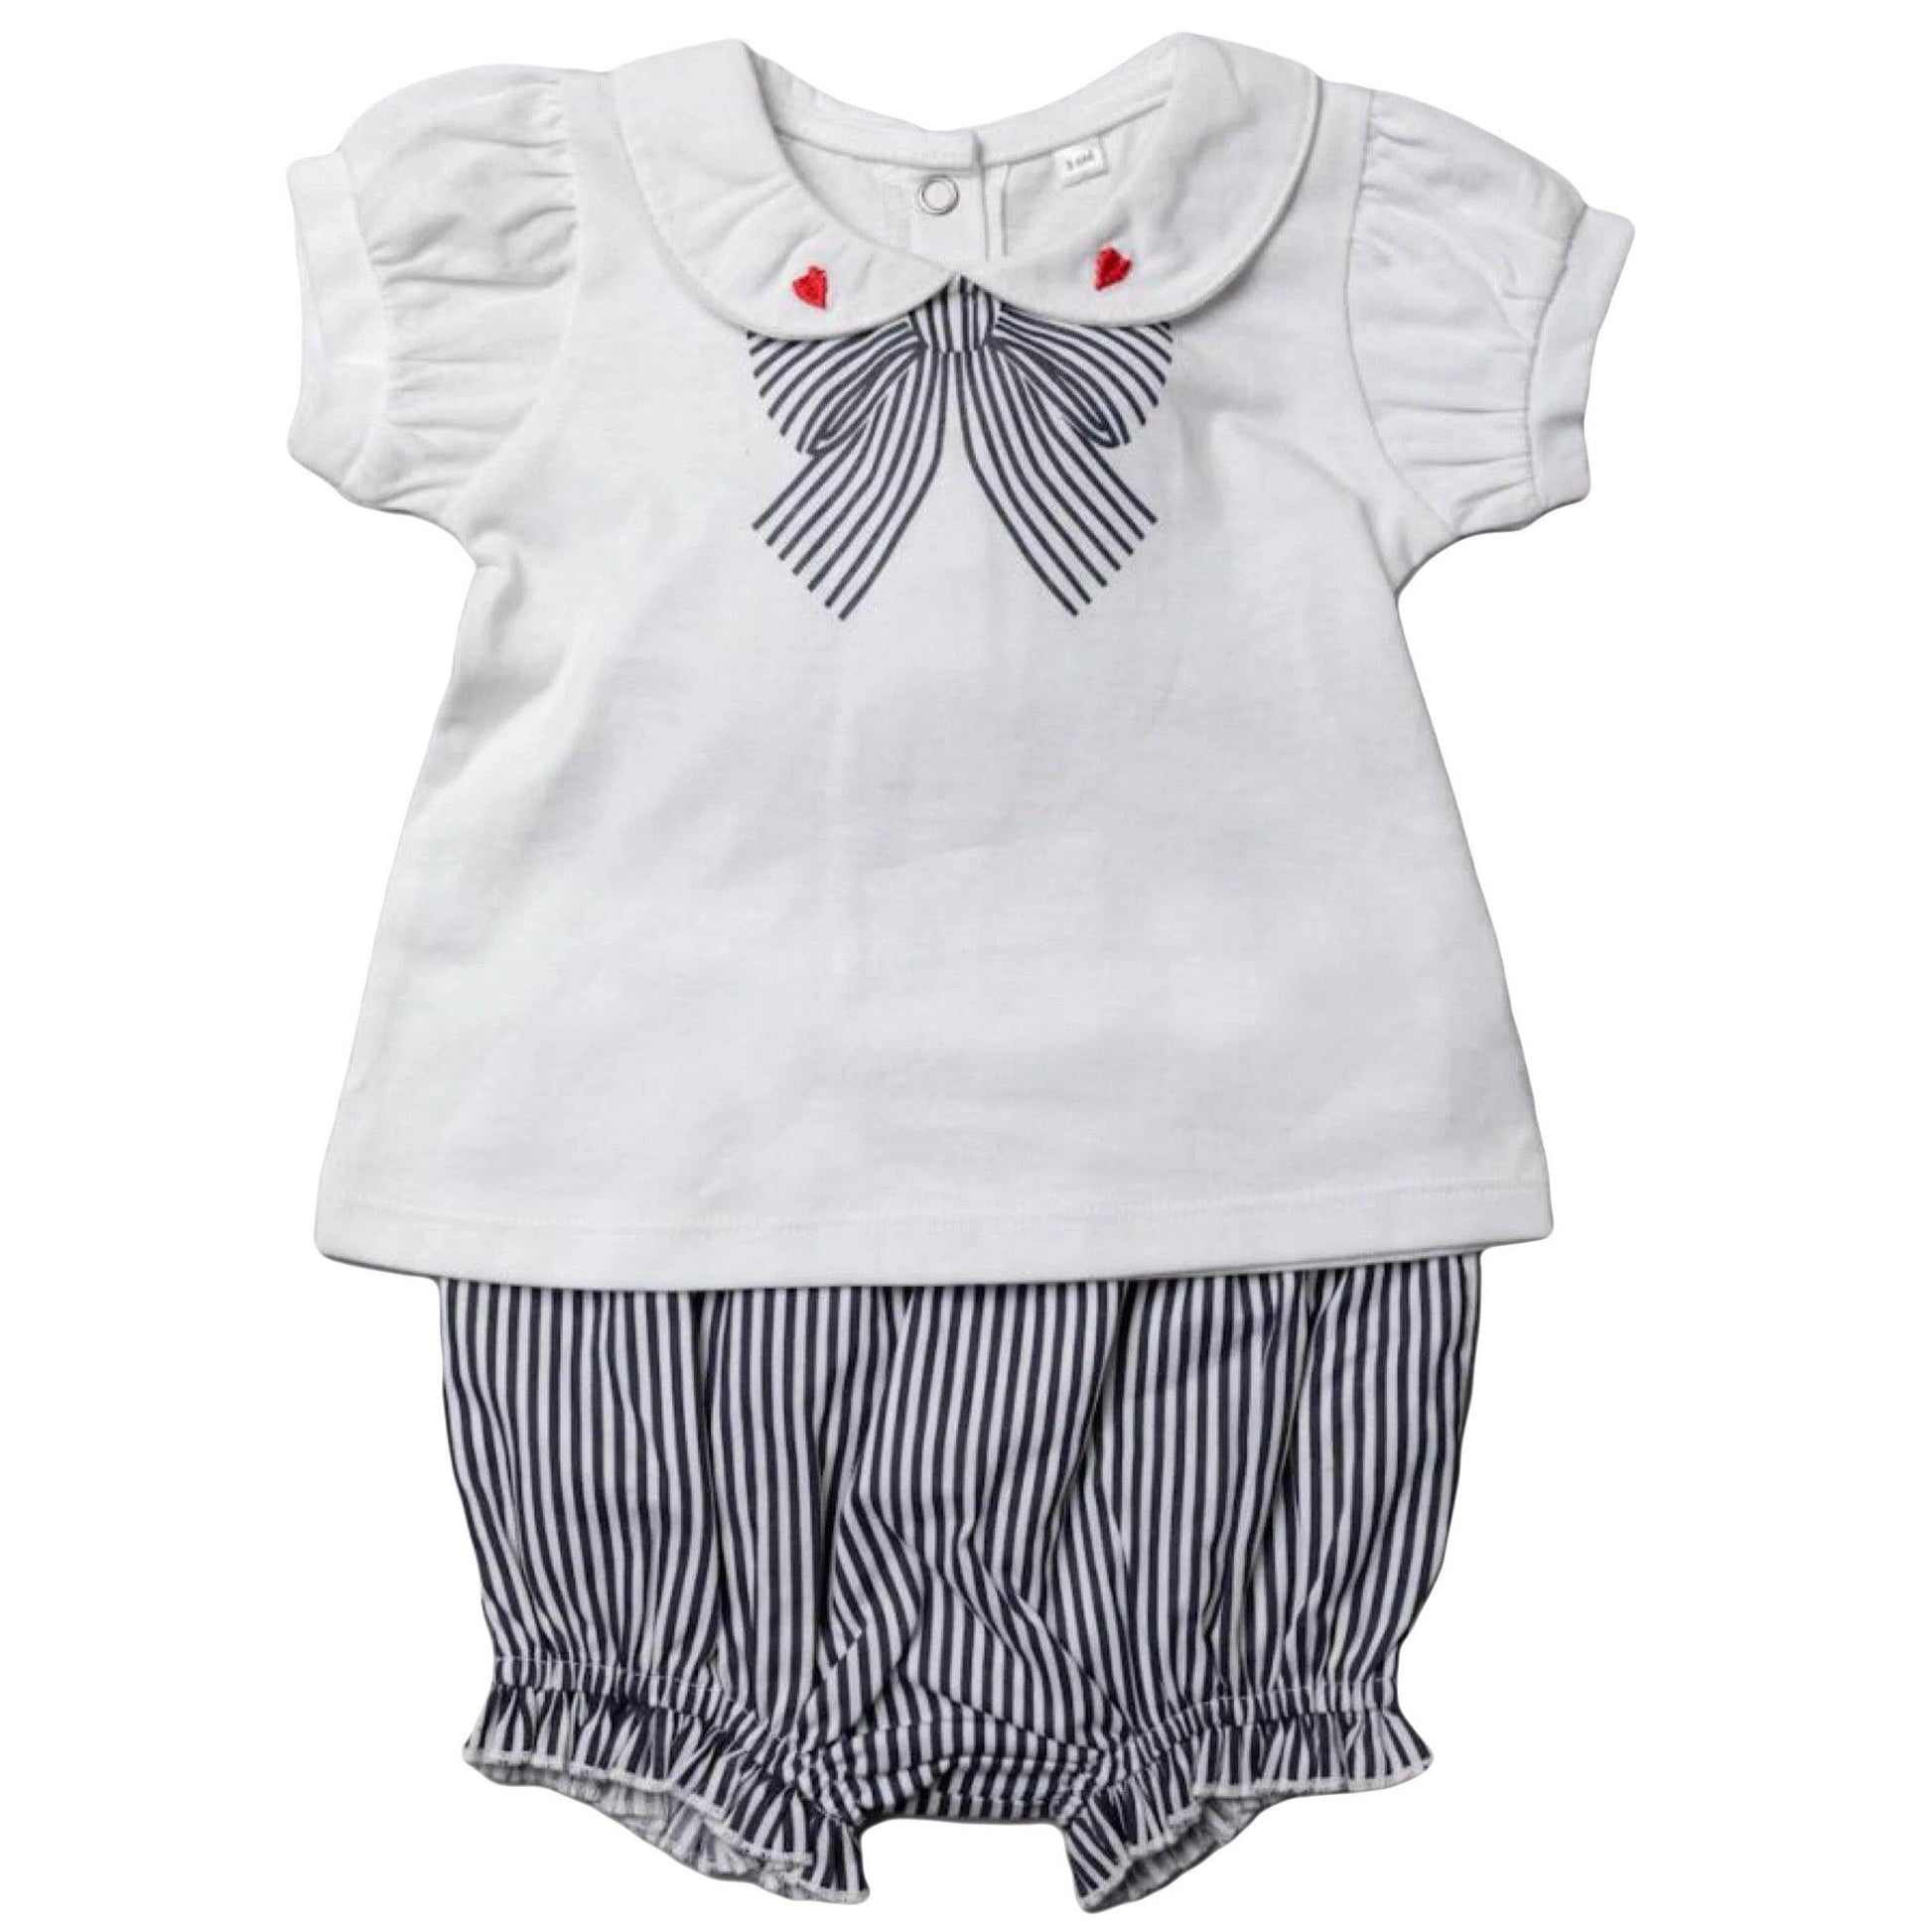 Baby Girls Top & Shorts Outfit | Oscar & Me | Baby & Children’s Clothing & Accessories